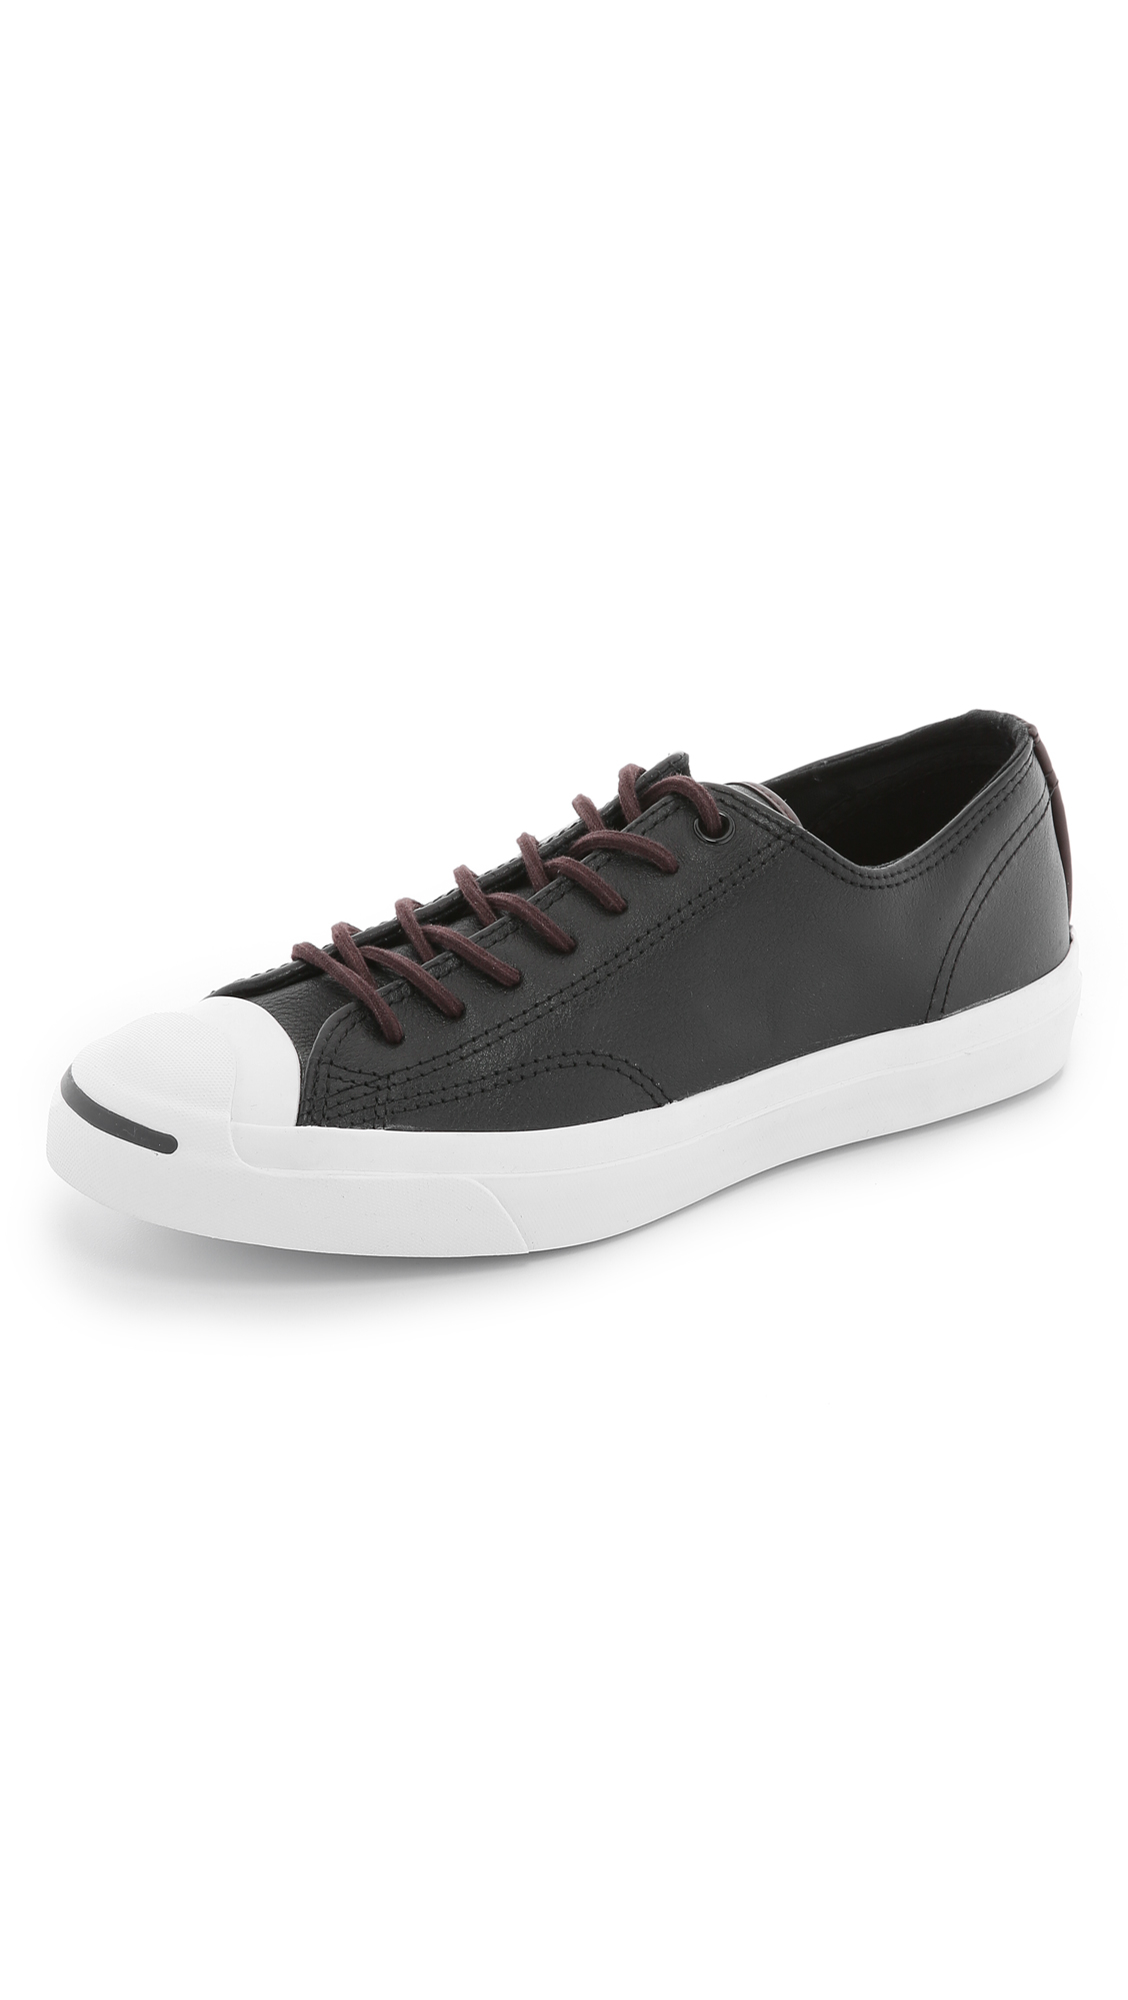 Lyst - Converse Jack Purcell Leather Sneakers in Black for Men